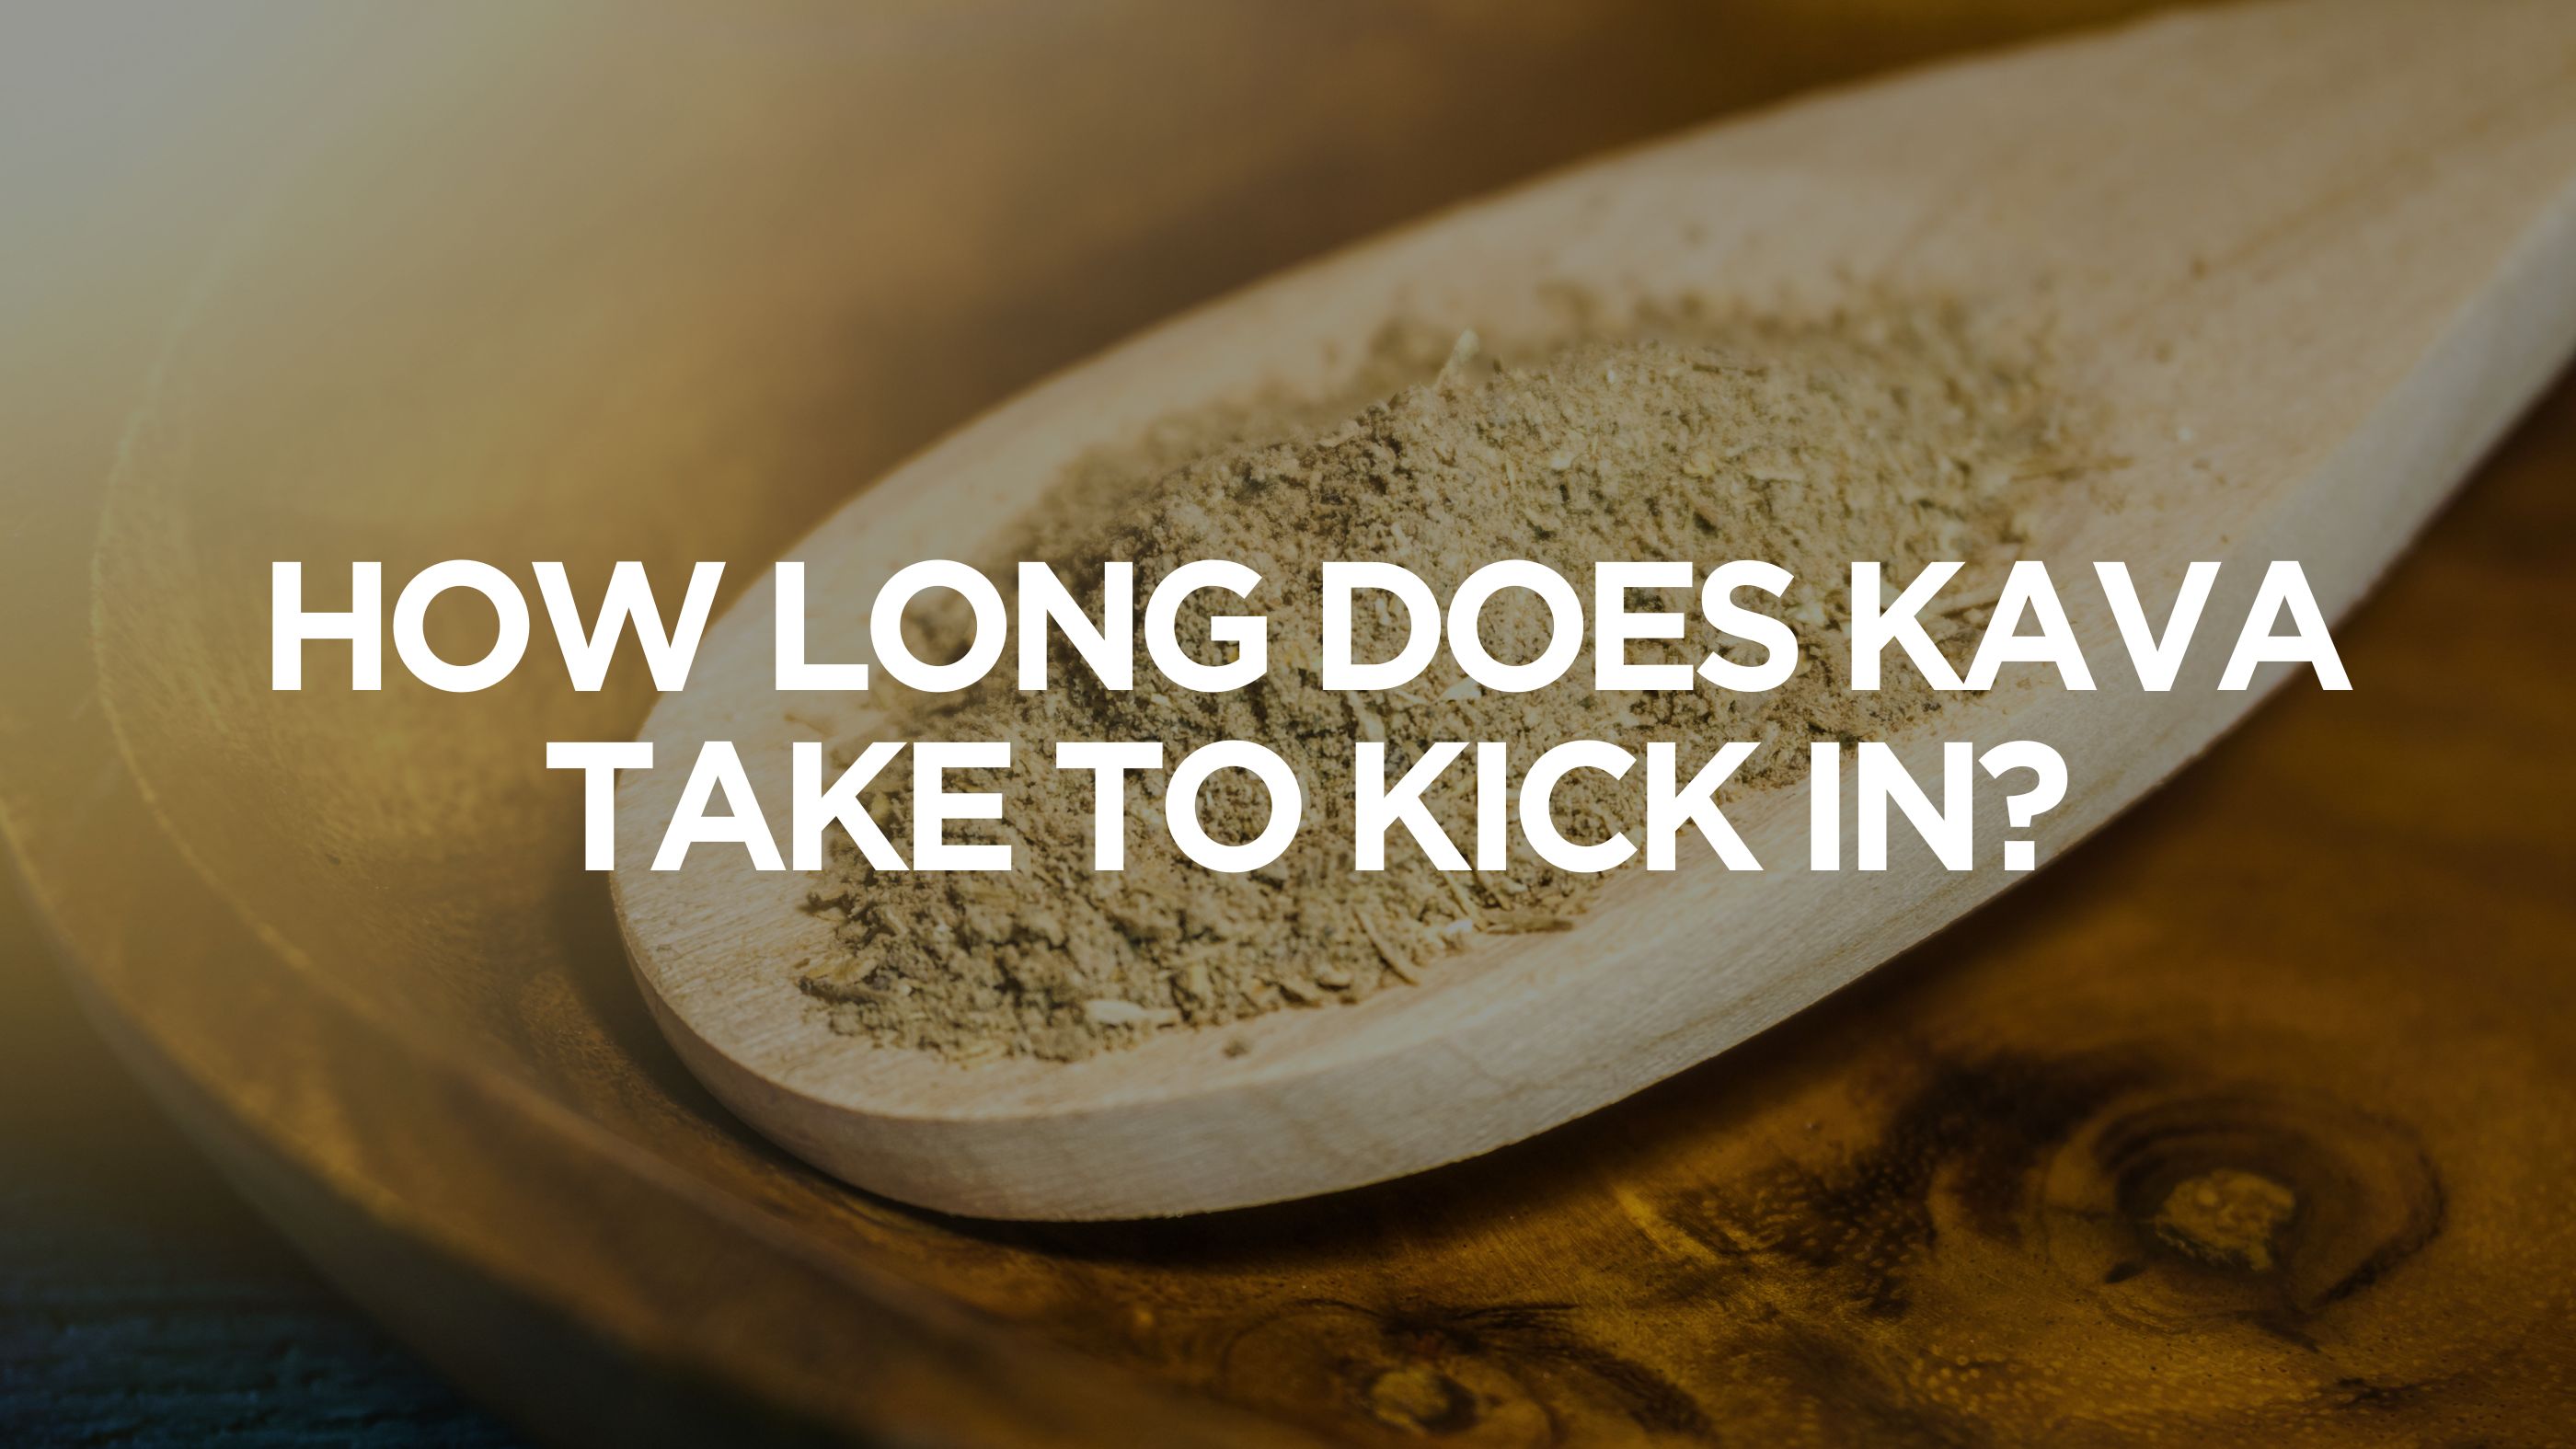 How Long Does Kava Take to Kick In?